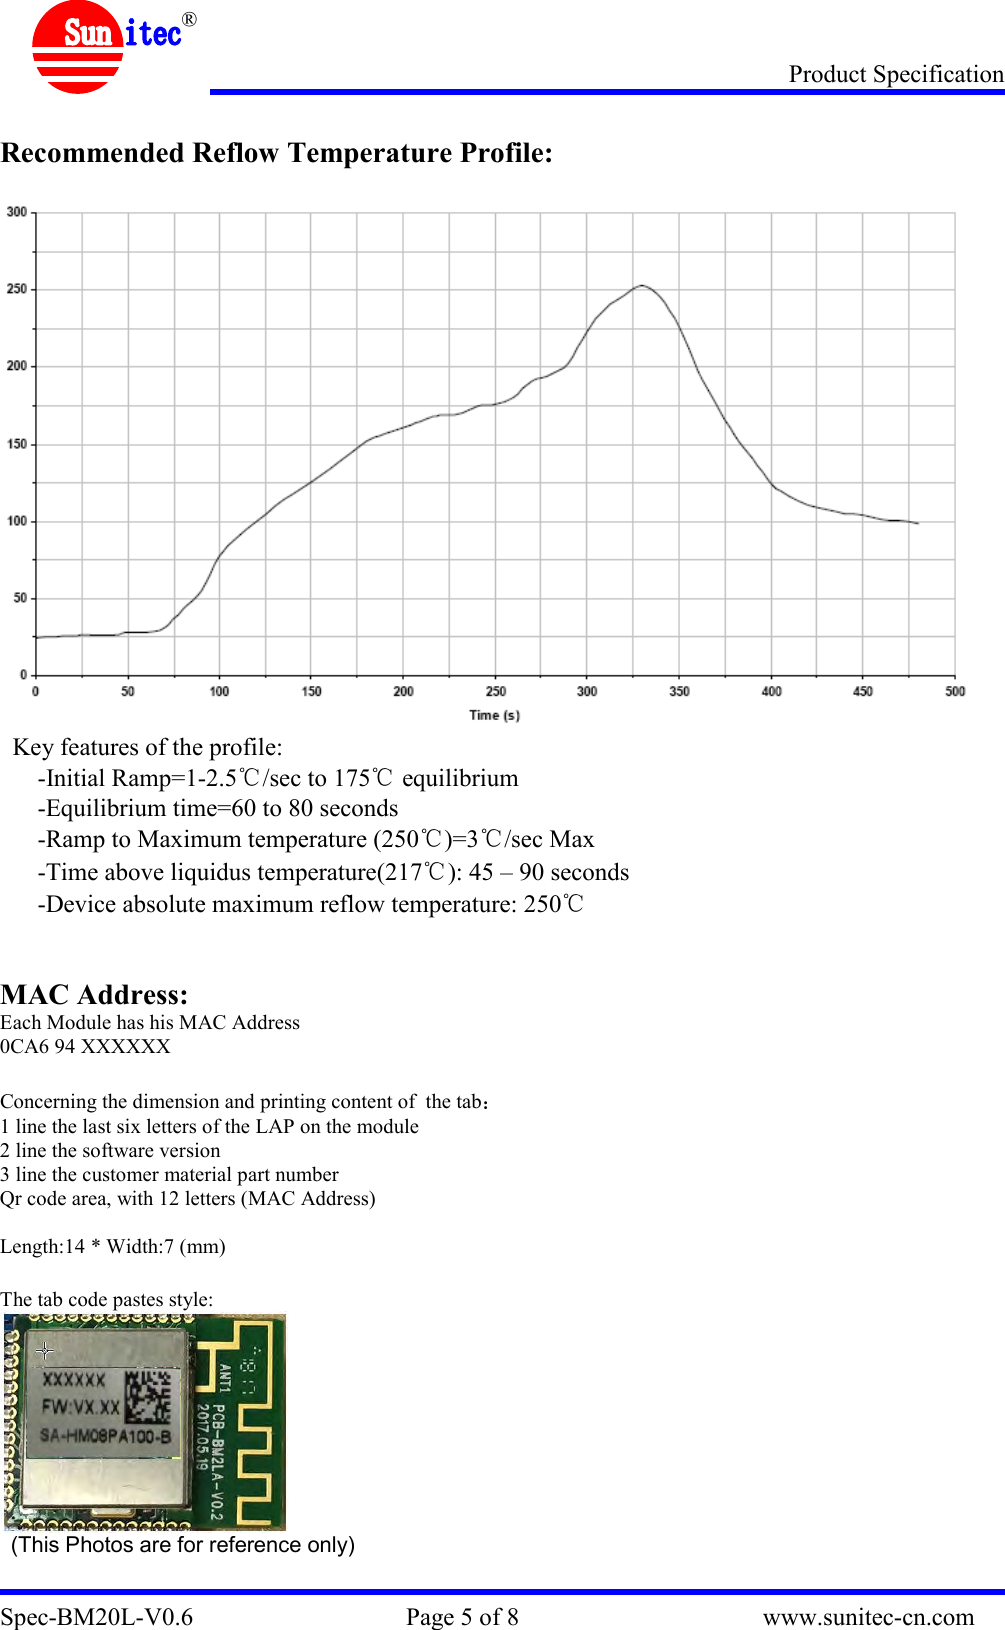 Product Specification Spec-BM20L-V0.6                                  Page 5 of 8                                       www.sunitec-cn.com  ®  Recommended Reflow Temperature Profile:   Key features of the profile: -Initial Ramp=1-2.5℃/sec to 175℃ equilibrium -Equilibrium time=60 to 80 seconds -Ramp to Maximum temperature (250℃)=3℃/sec Max -Time above liquidus temperature(217℃): 45 – 90 seconds -Device absolute maximum reflow temperature: 250℃   MAC Address: Each Module has his MAC Address 0CA6 94 XXXXXX  Concerning the dimension and printing content of  the tab  1 line the last six letters of the LAP on the module 2 line the software version 3 line the customer material part number Qr code area, with 12 letters (MAC Address)  Length:14 * Width:7 (mm)  The tab code pastes style:    (This Photos are for reference only)  